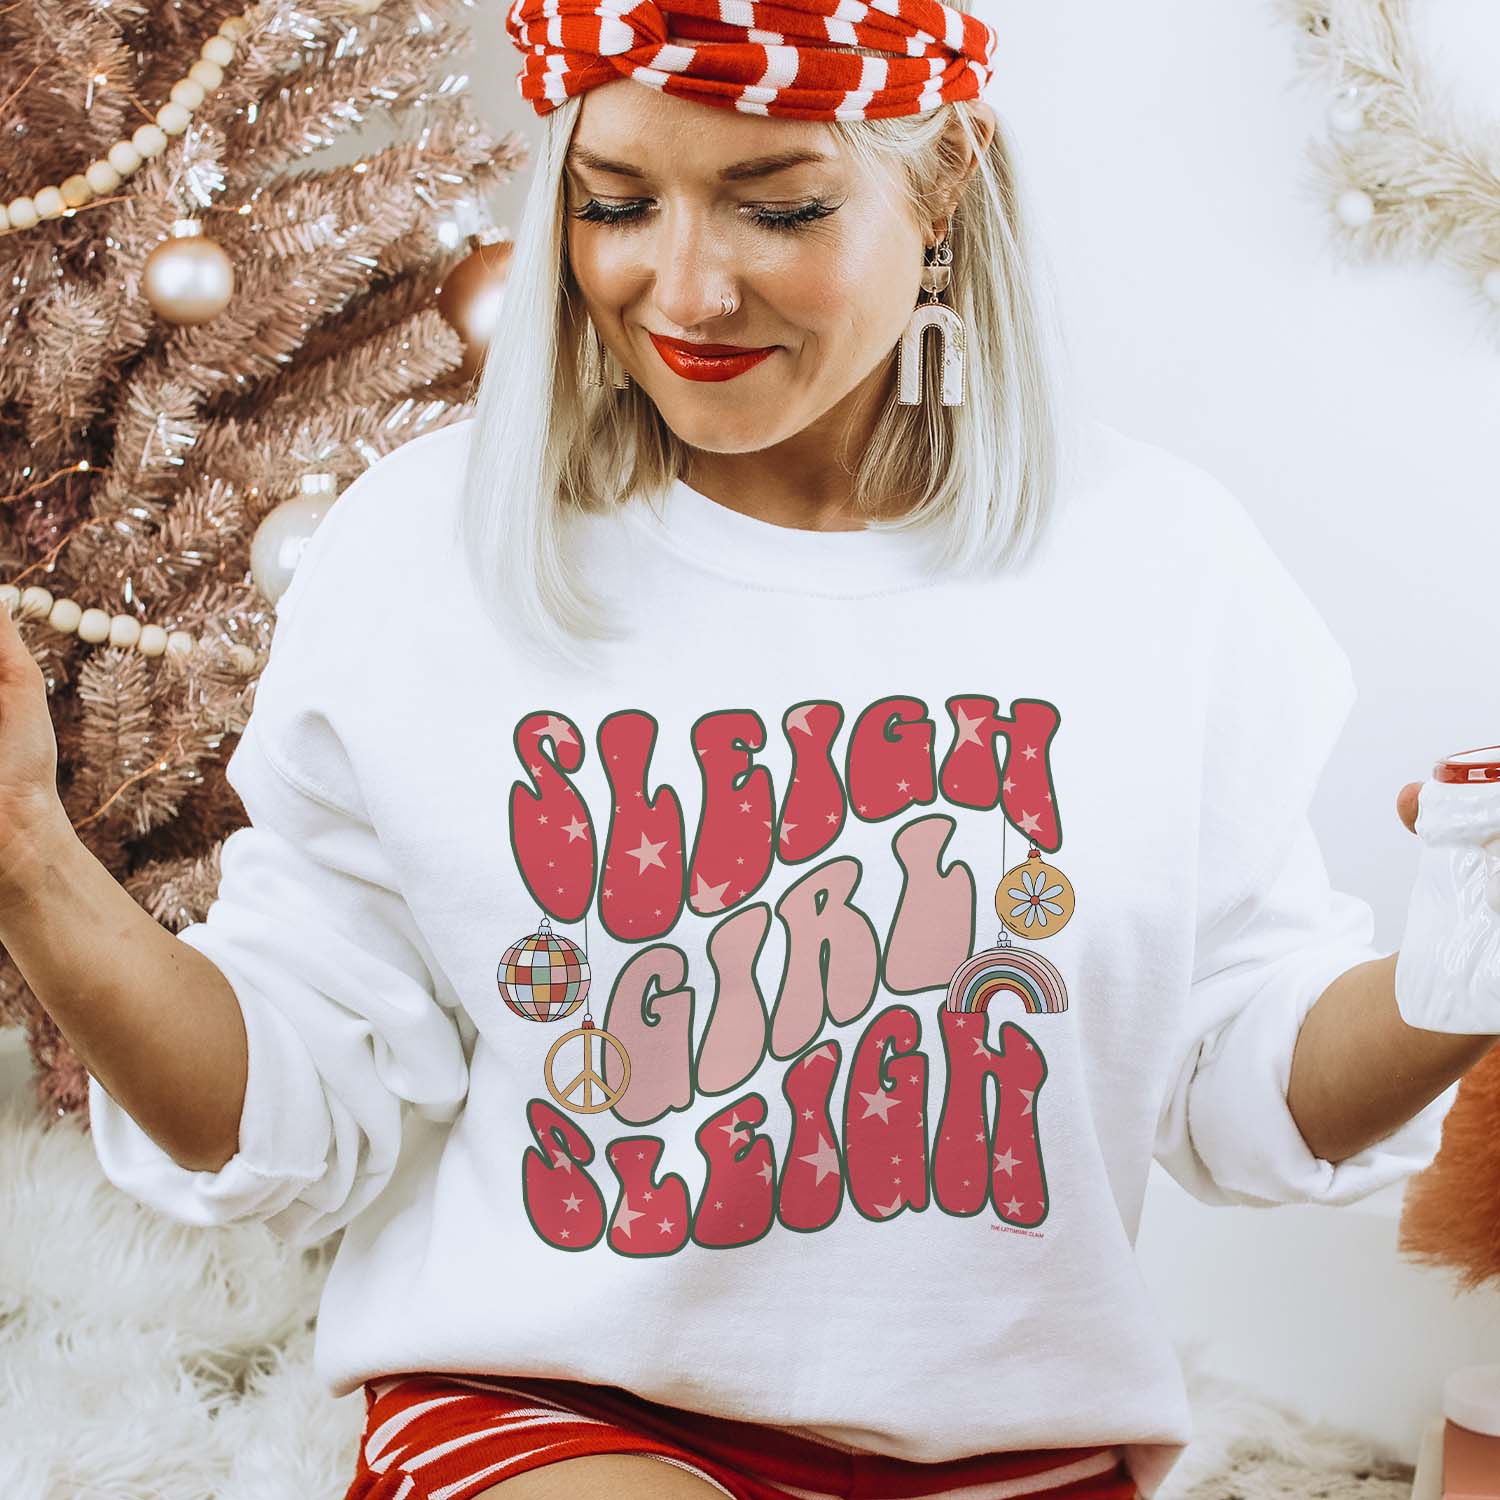 This white sweatshirt features a crew neckline, long sleeves, and a hand drawn graphic with the words "Sleigh Girl Sleigh" in a fun, groovy font. The words "Sleigh" is red with light pink stars throughout, and the word "Girl" is light pink". There are four different ornaments hanging from the first "Sleigh" that are a disco ball, peace sign, rainbow, and a floral ornament. These are in fun, light colors.